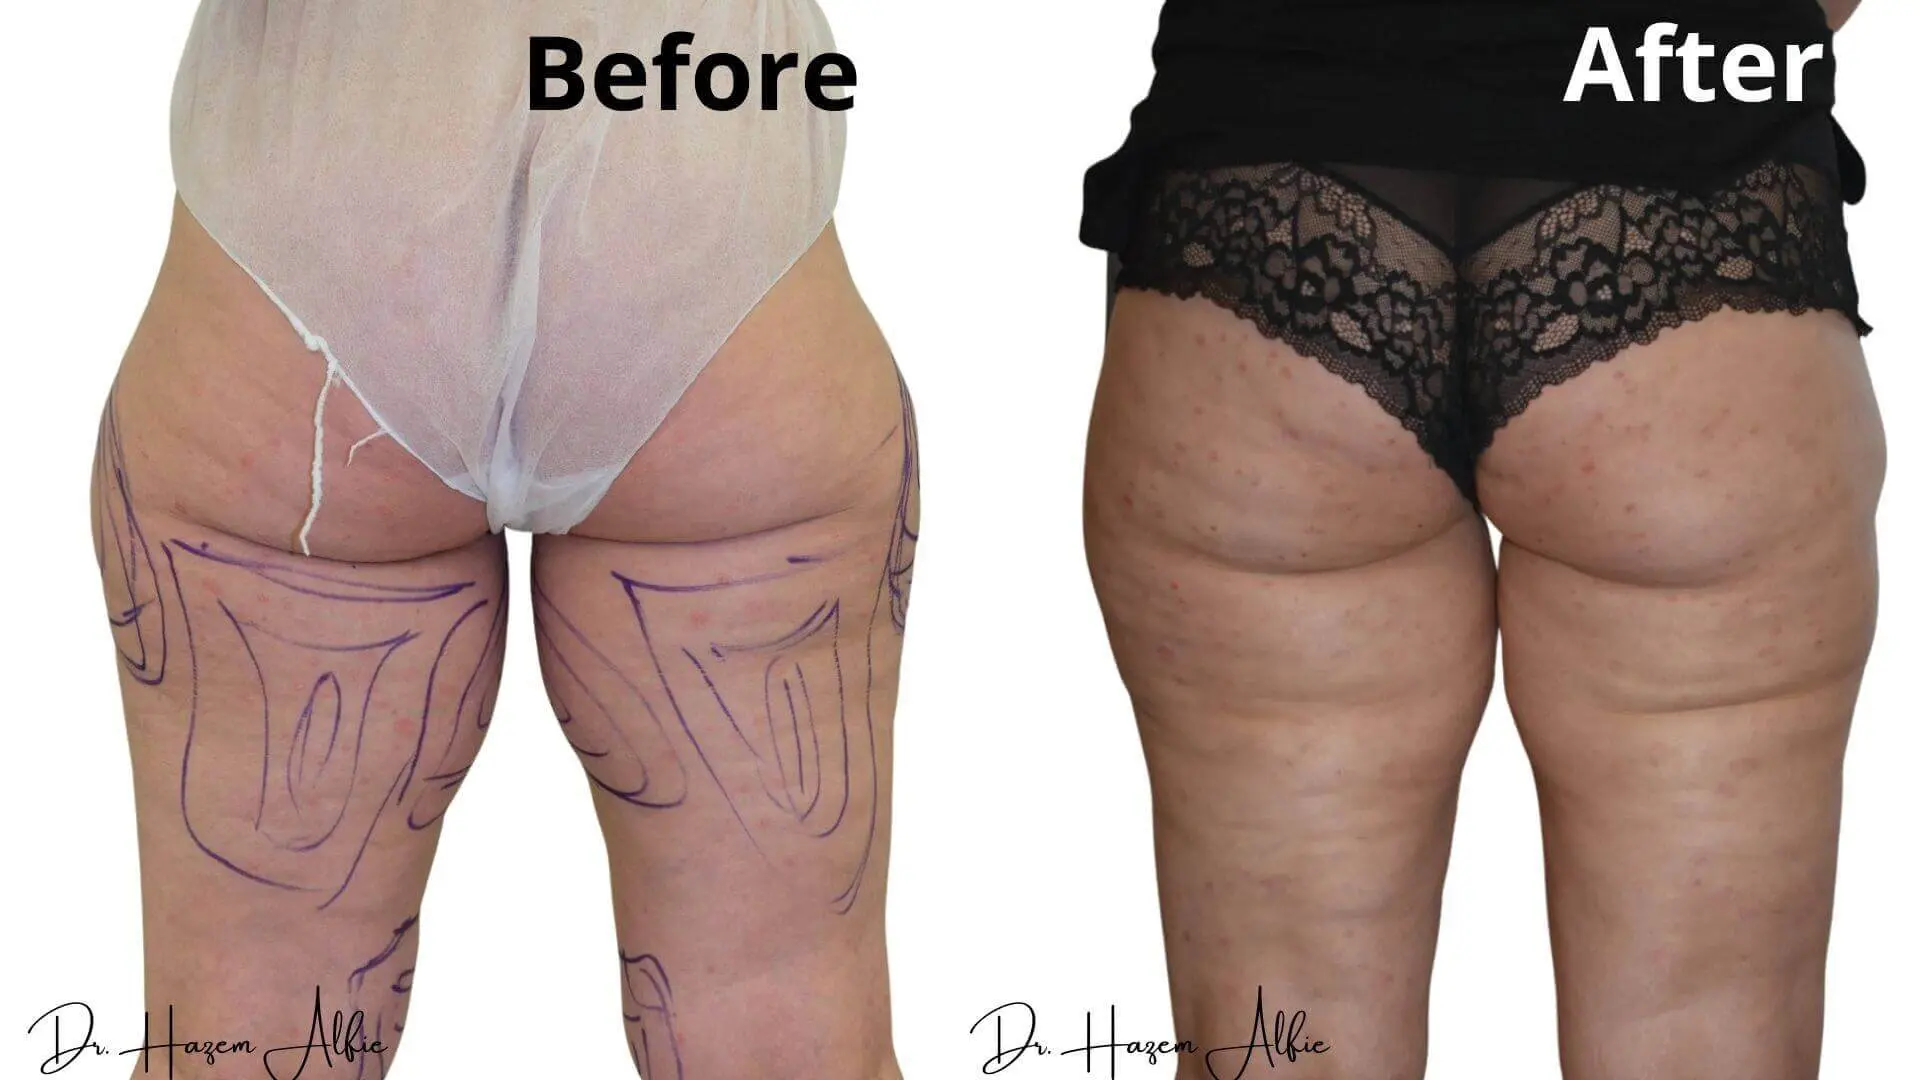 A woman 's legs before and after liposuction.